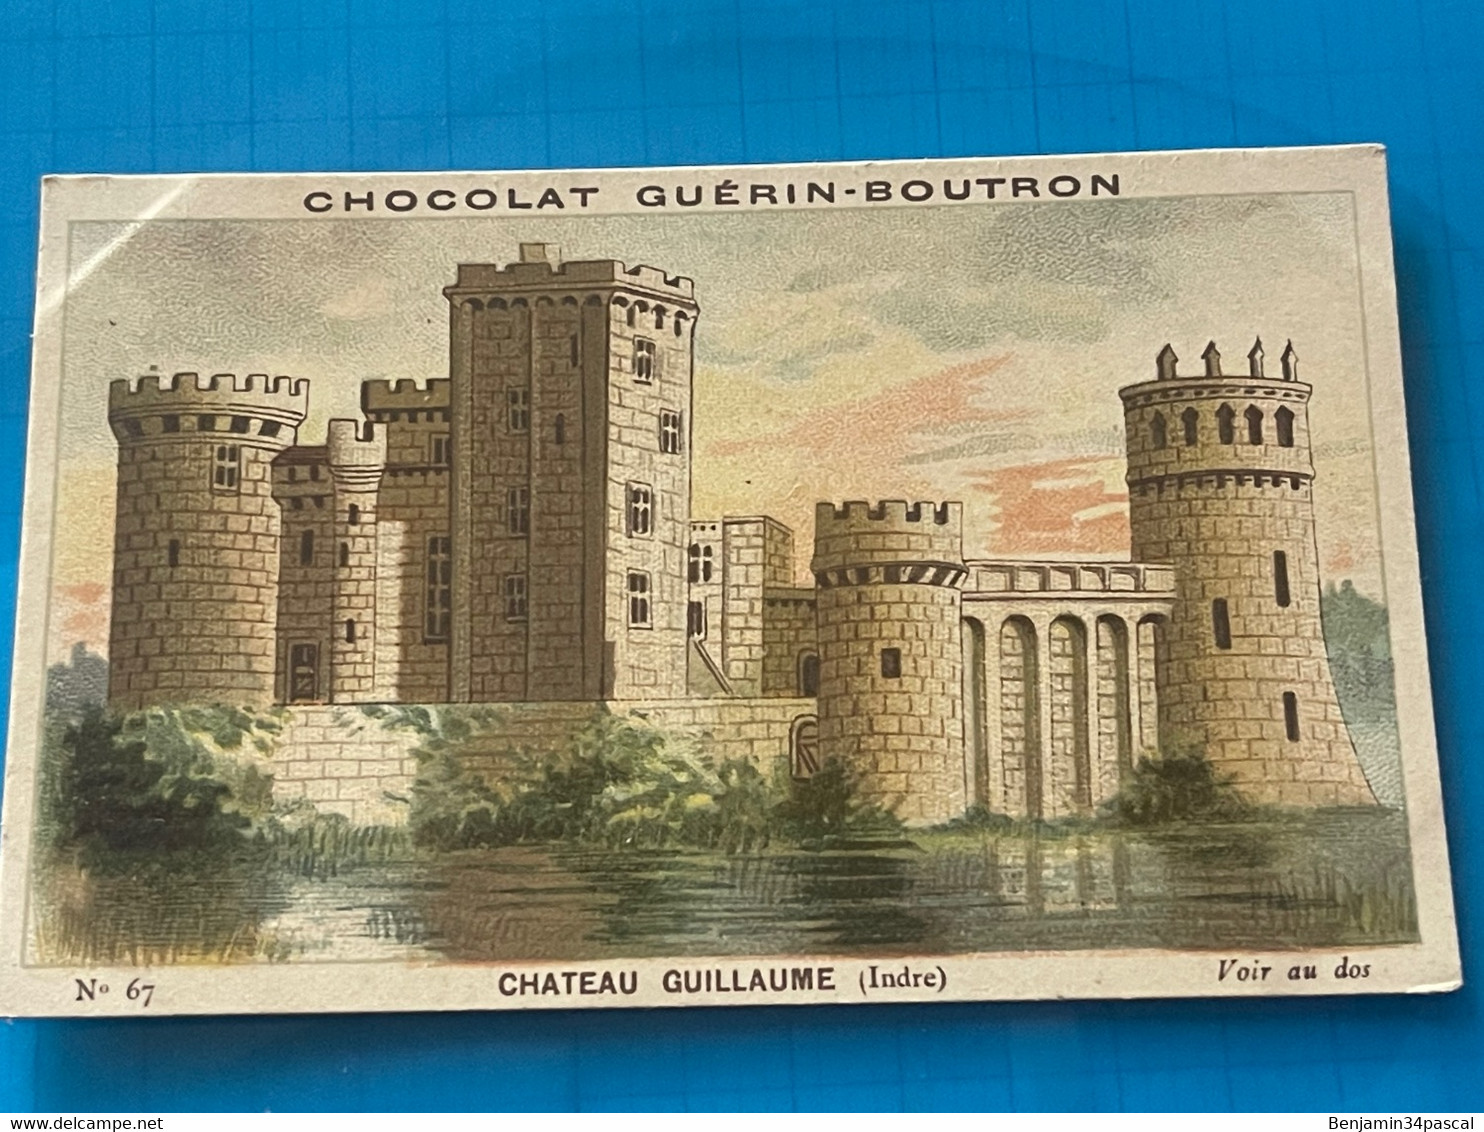 Chocolat GUÉRIN-BOUTRON Image -Chromo Ancienne - Château Guillaume  ( Indre ) - Chocolat